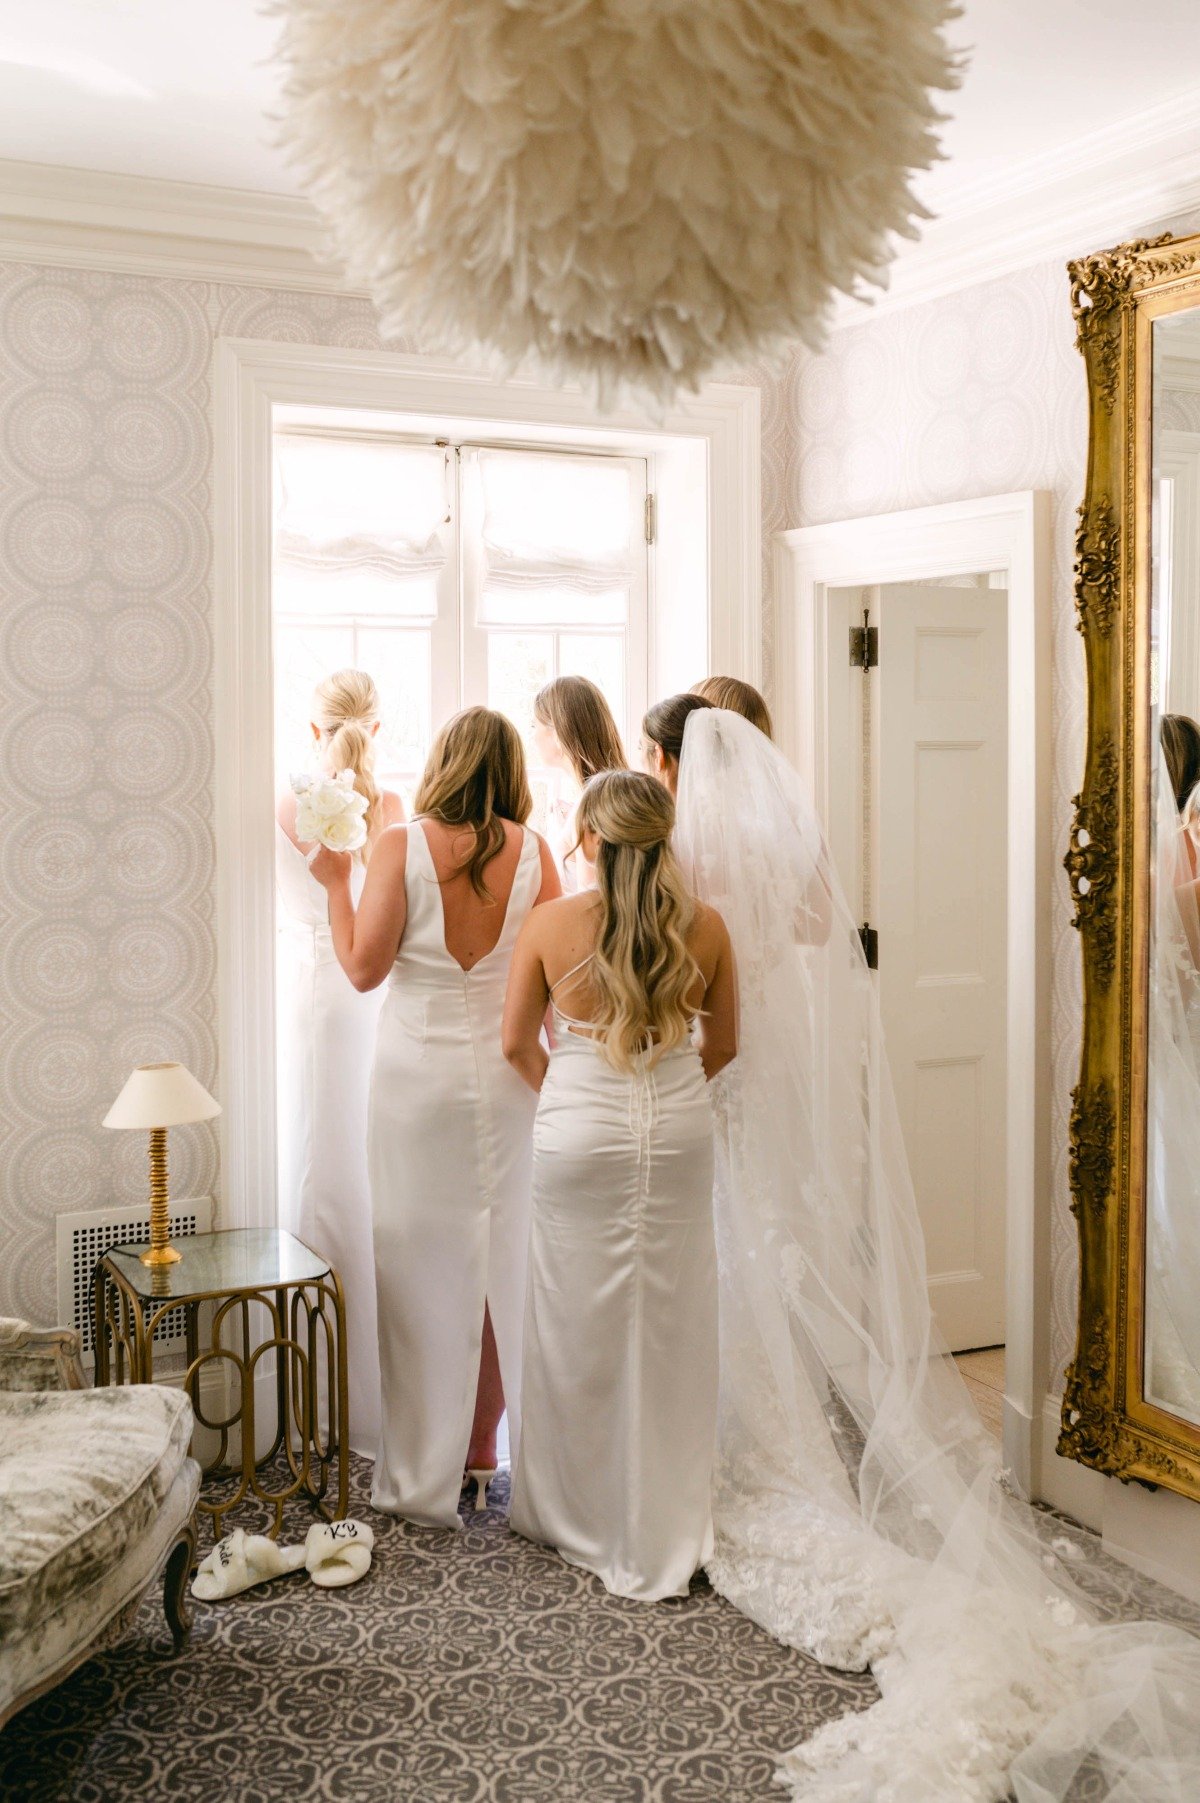 Bride and bridesmaids looking out the window